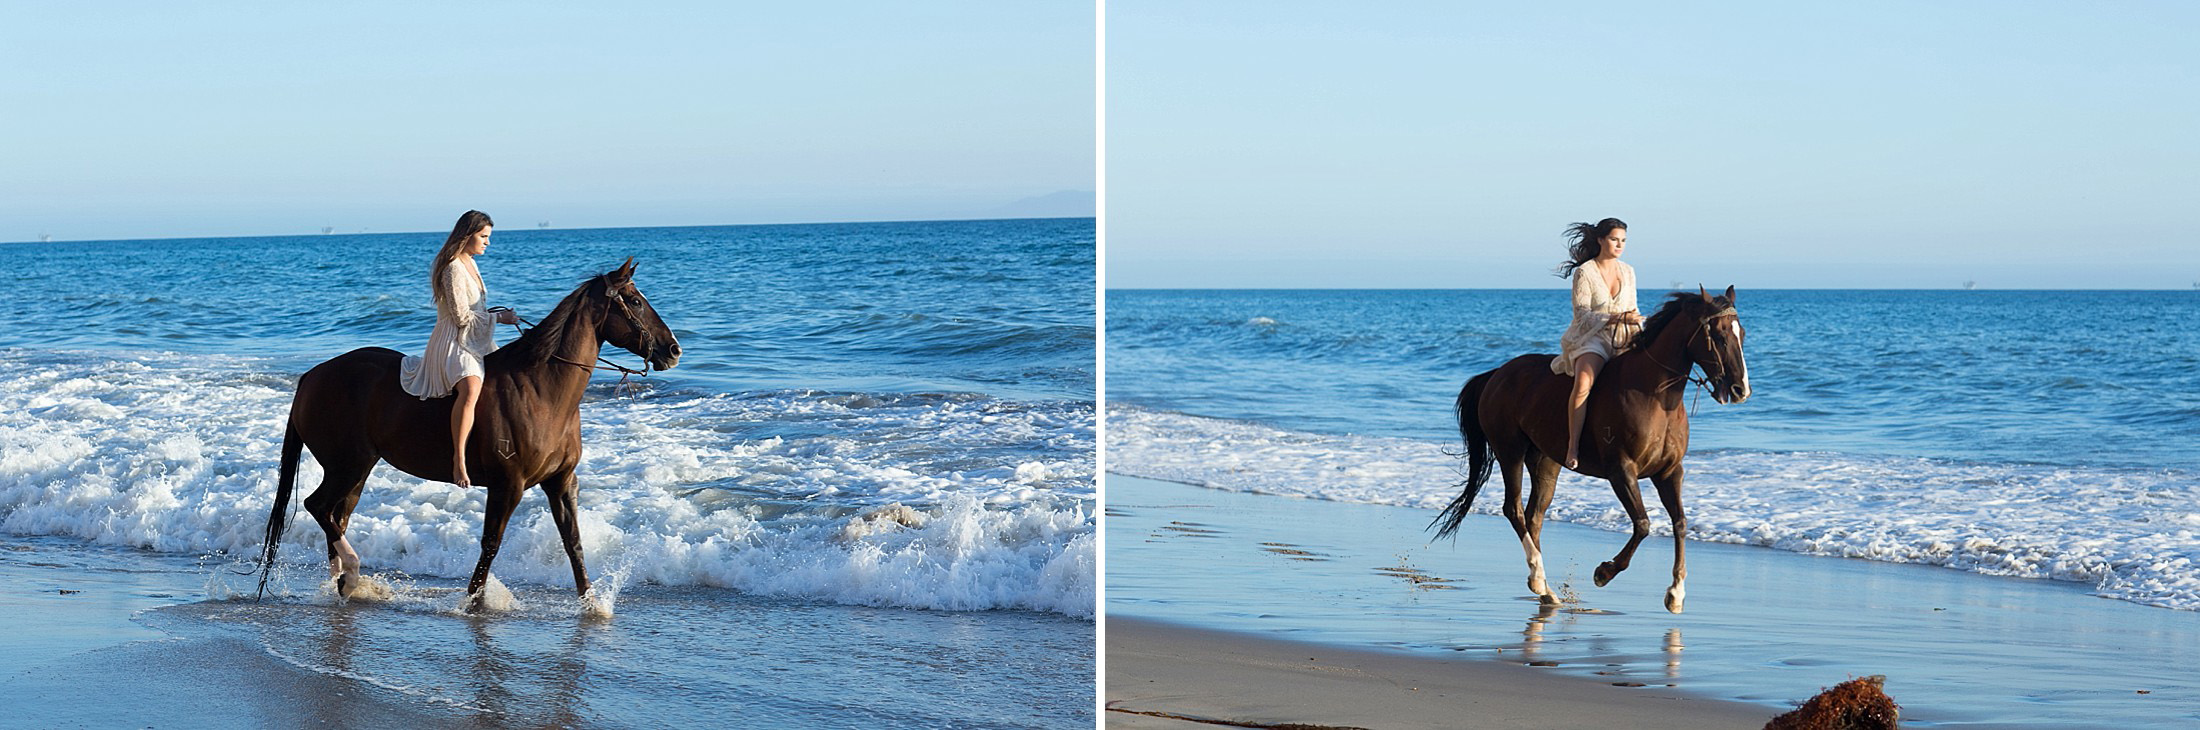 Equestrian Senior Pictures at the Beach by Tara Rochelle